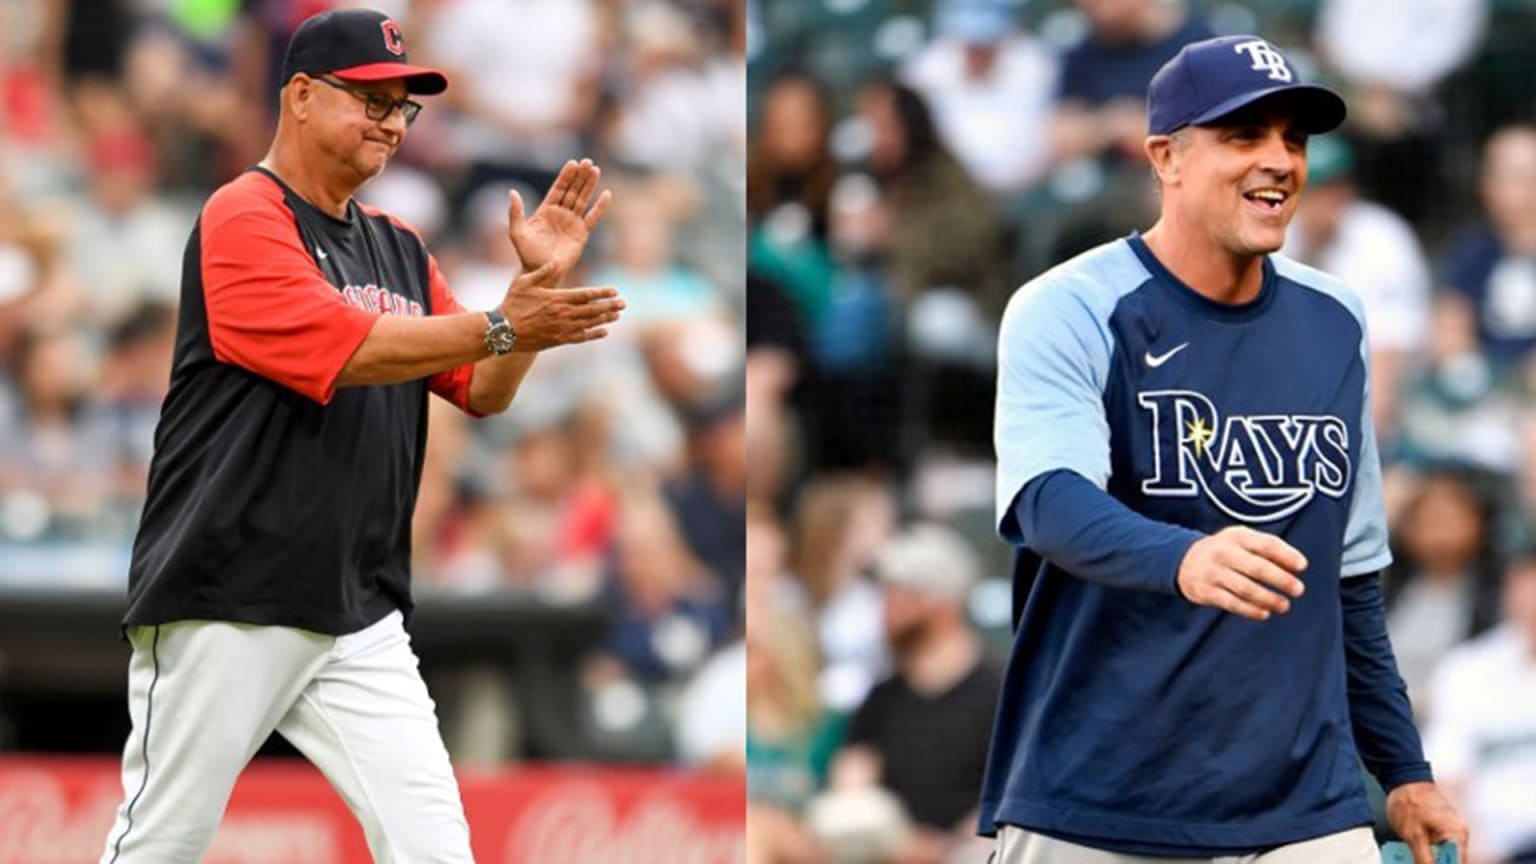 A split photo shows side by side shots of Terry Francona and Kevin Cash